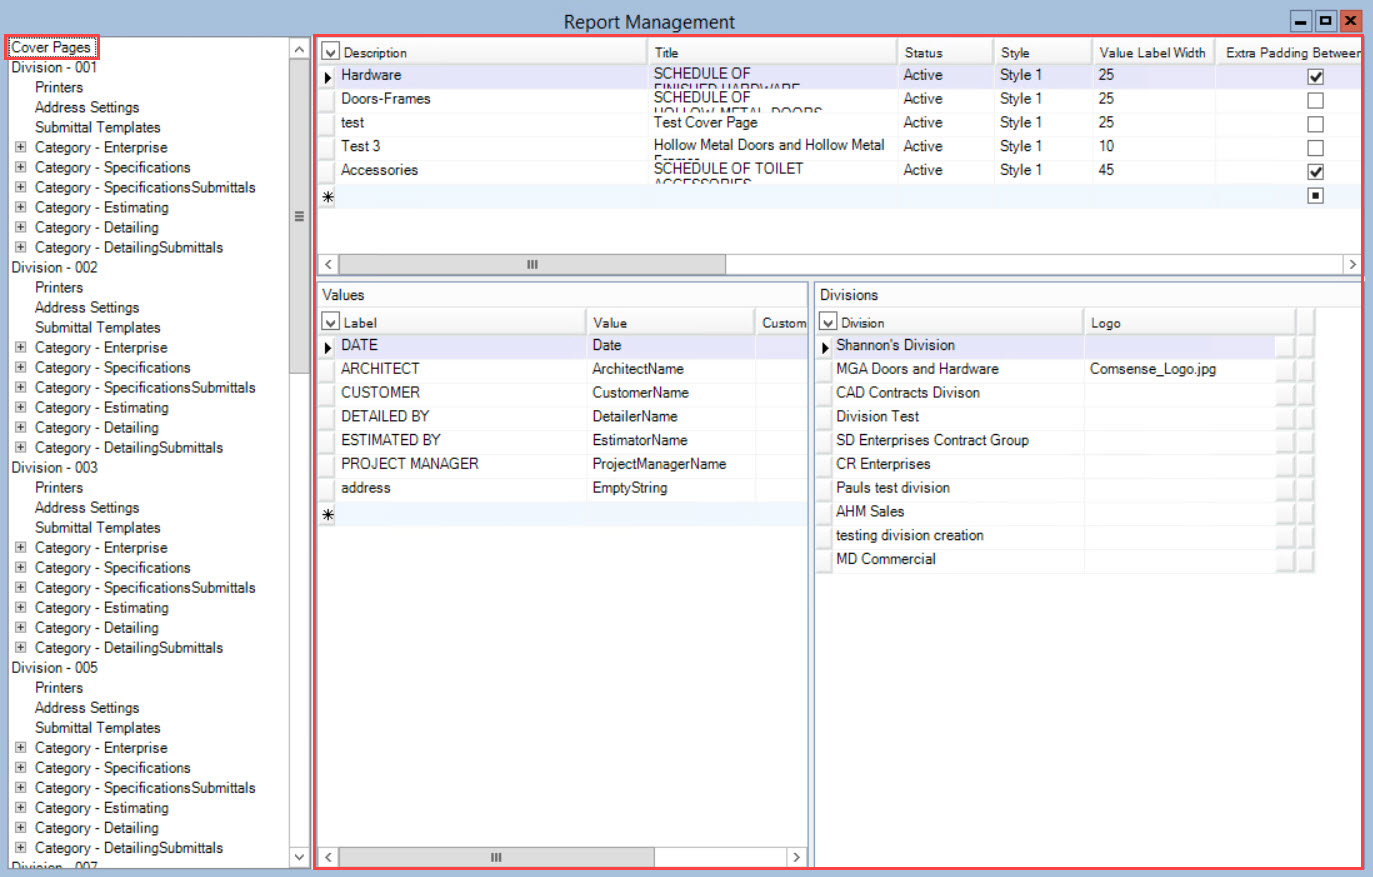 Report Management window; shows the location of Cover Pages in the Report Management menu pane and the Cover Pages page.